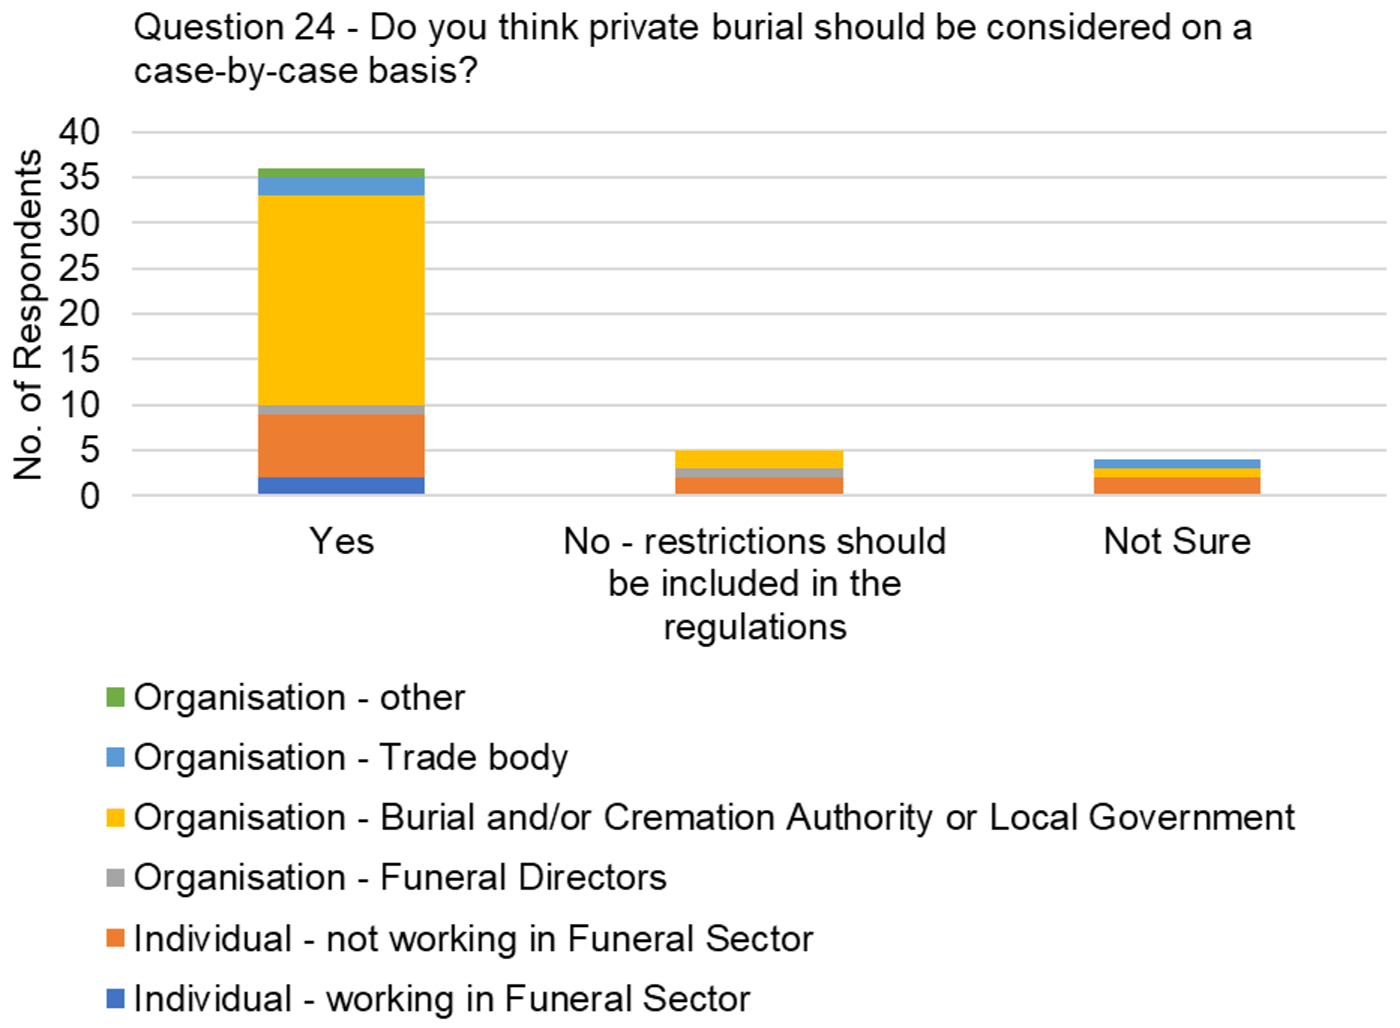 The graph visually presents the data from table 17, focussing on the responses to the question, "Do you think private burial should be considered on a case-by-case basis?"